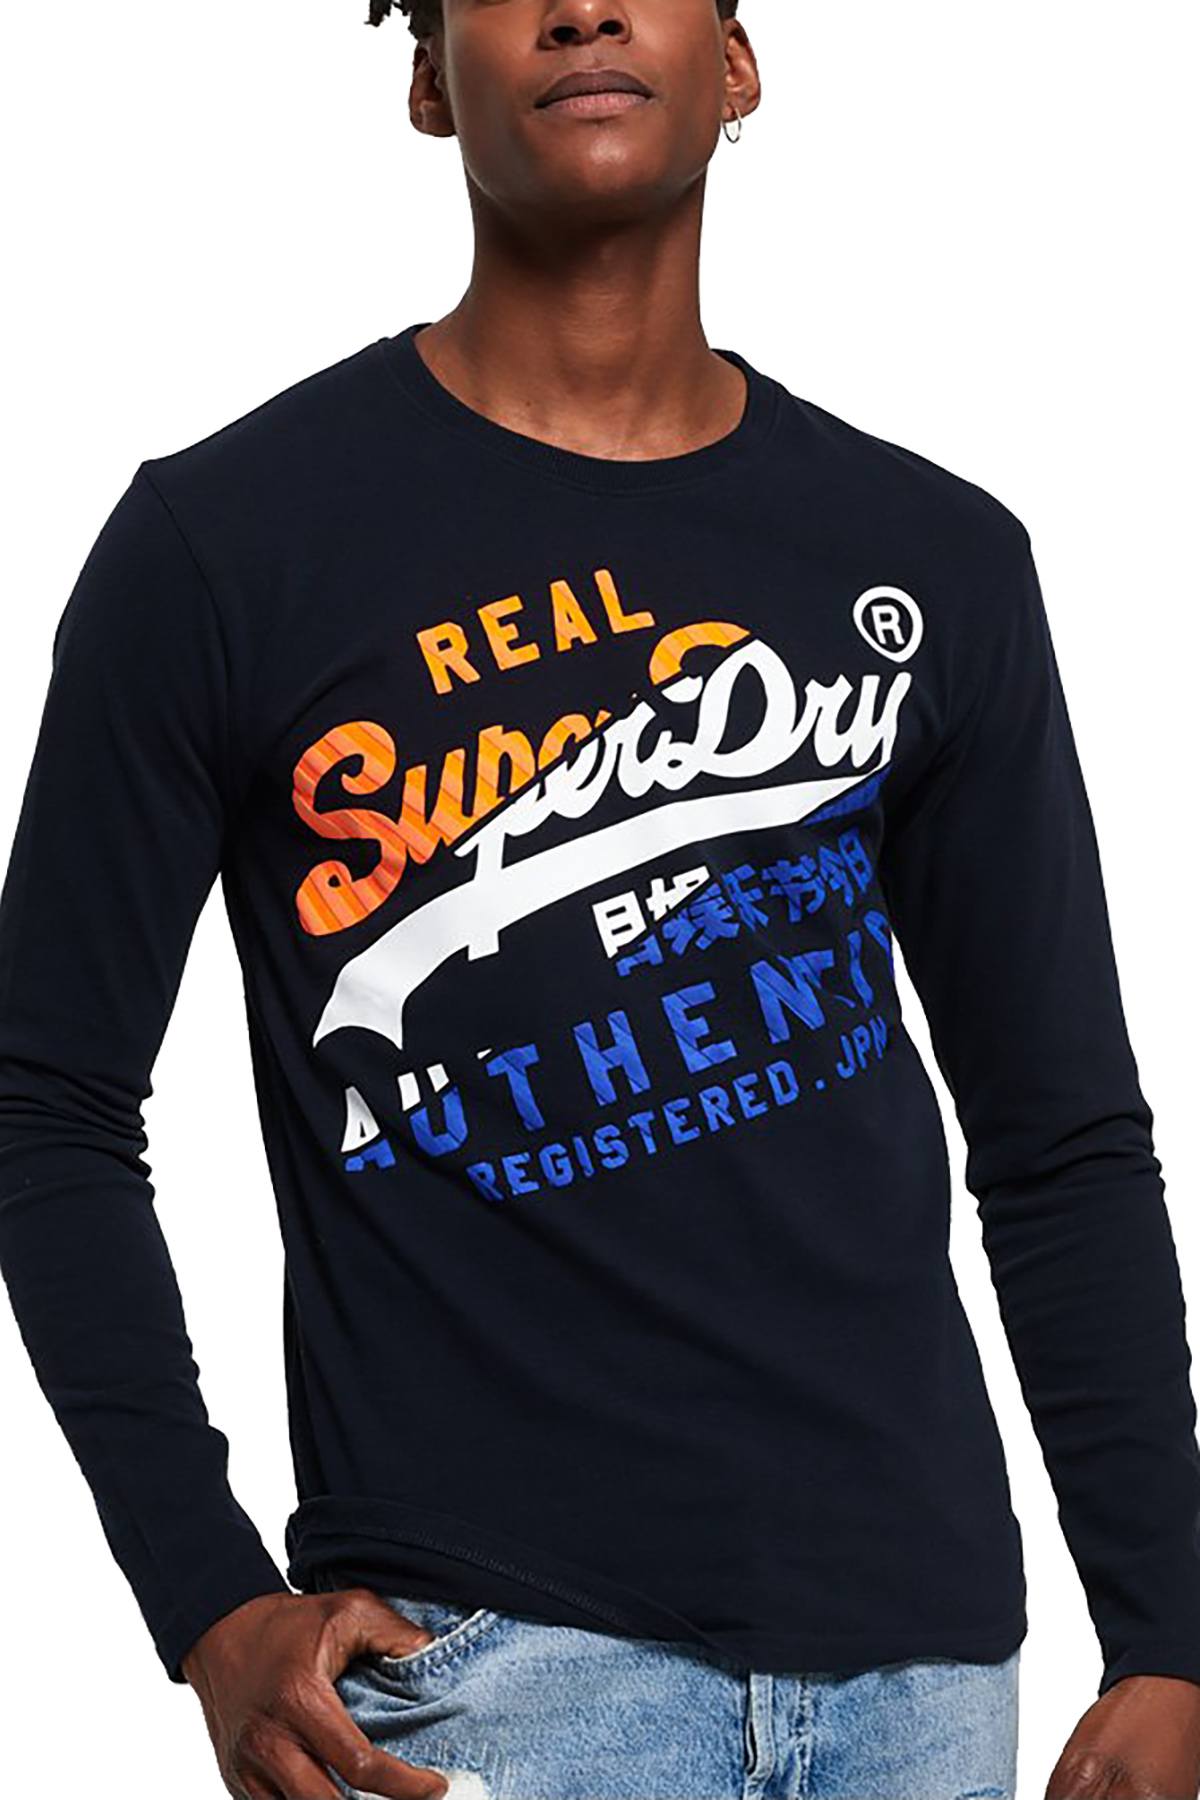 Vintage T-Shirt Authentic CheapUndies Long-Sleeve XL Eclipse-Navy – SuperDry